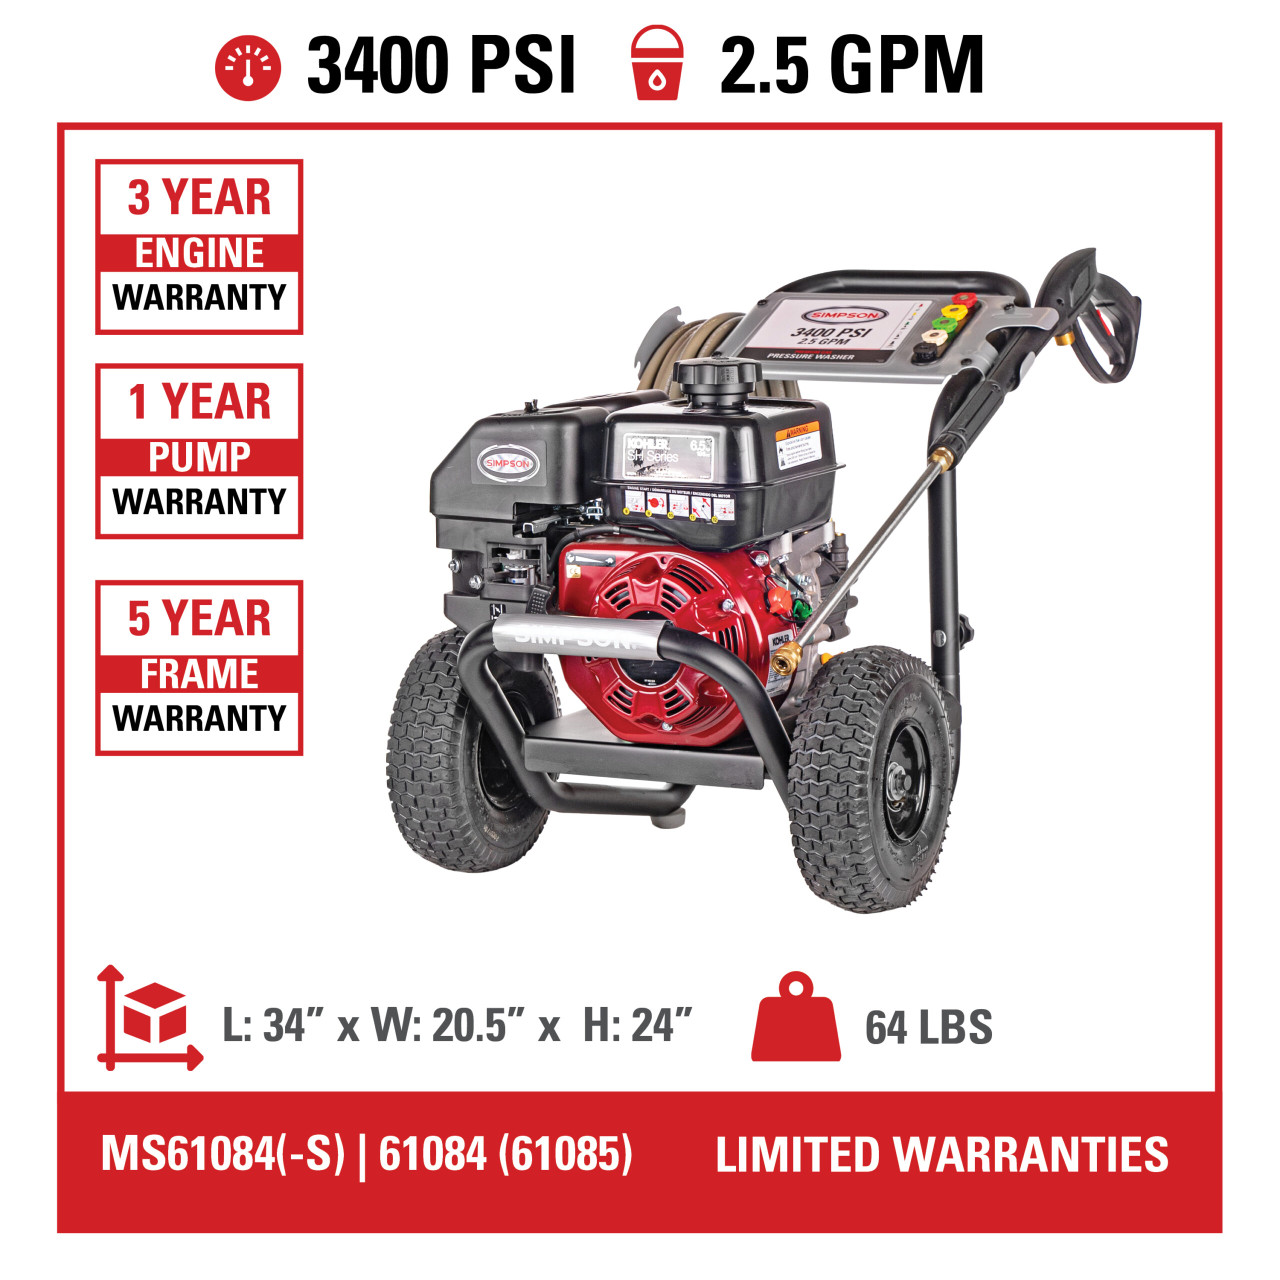 Megashot MS61084(-S) 50-State 3400 PSI at 2.5 GPM KOHLER® SH270 with OEM Technologies™ Axial Cam Pump Cold Water Premium Residential Gas Pressure Washer